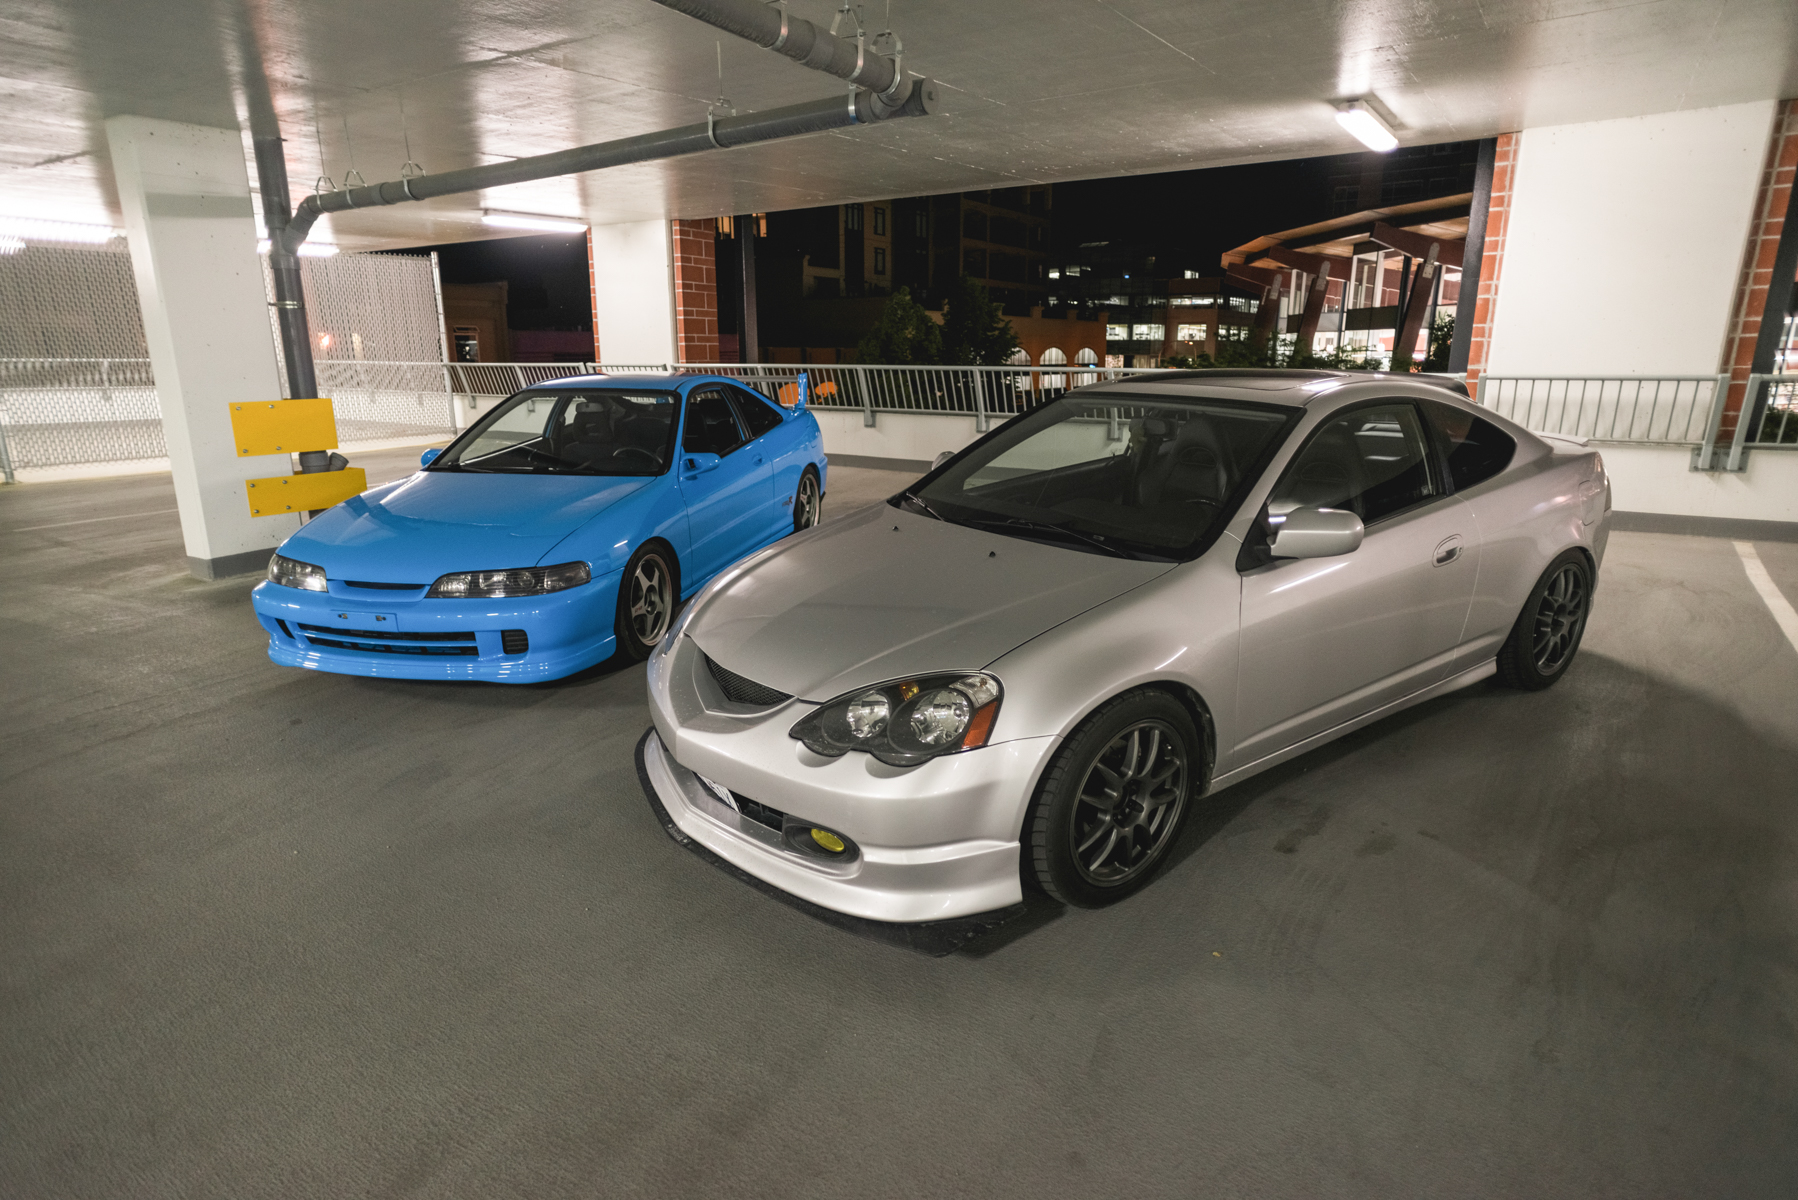 RSX appeared-1